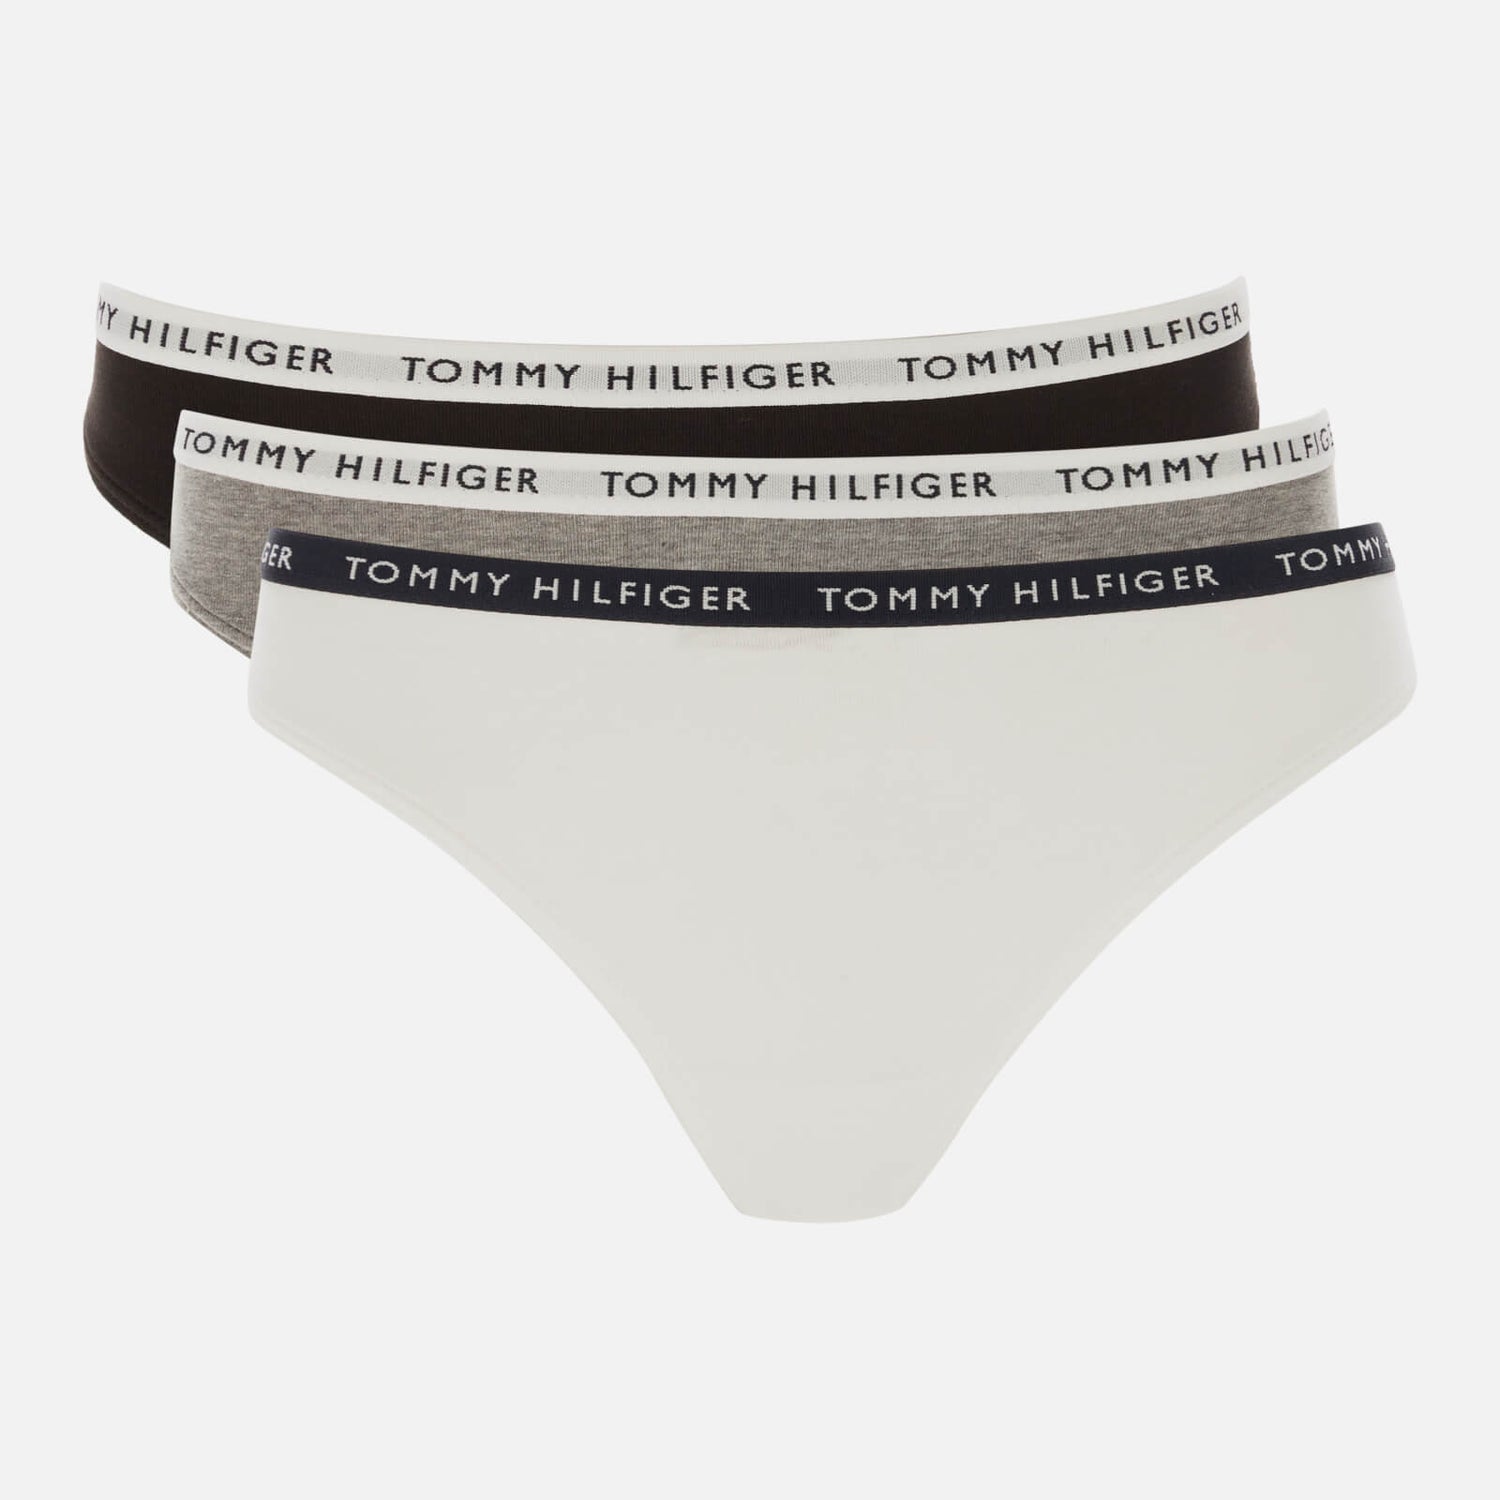 Tommy Hilfiger Women's Recycled 3P Thong - Grey/White/Black - S